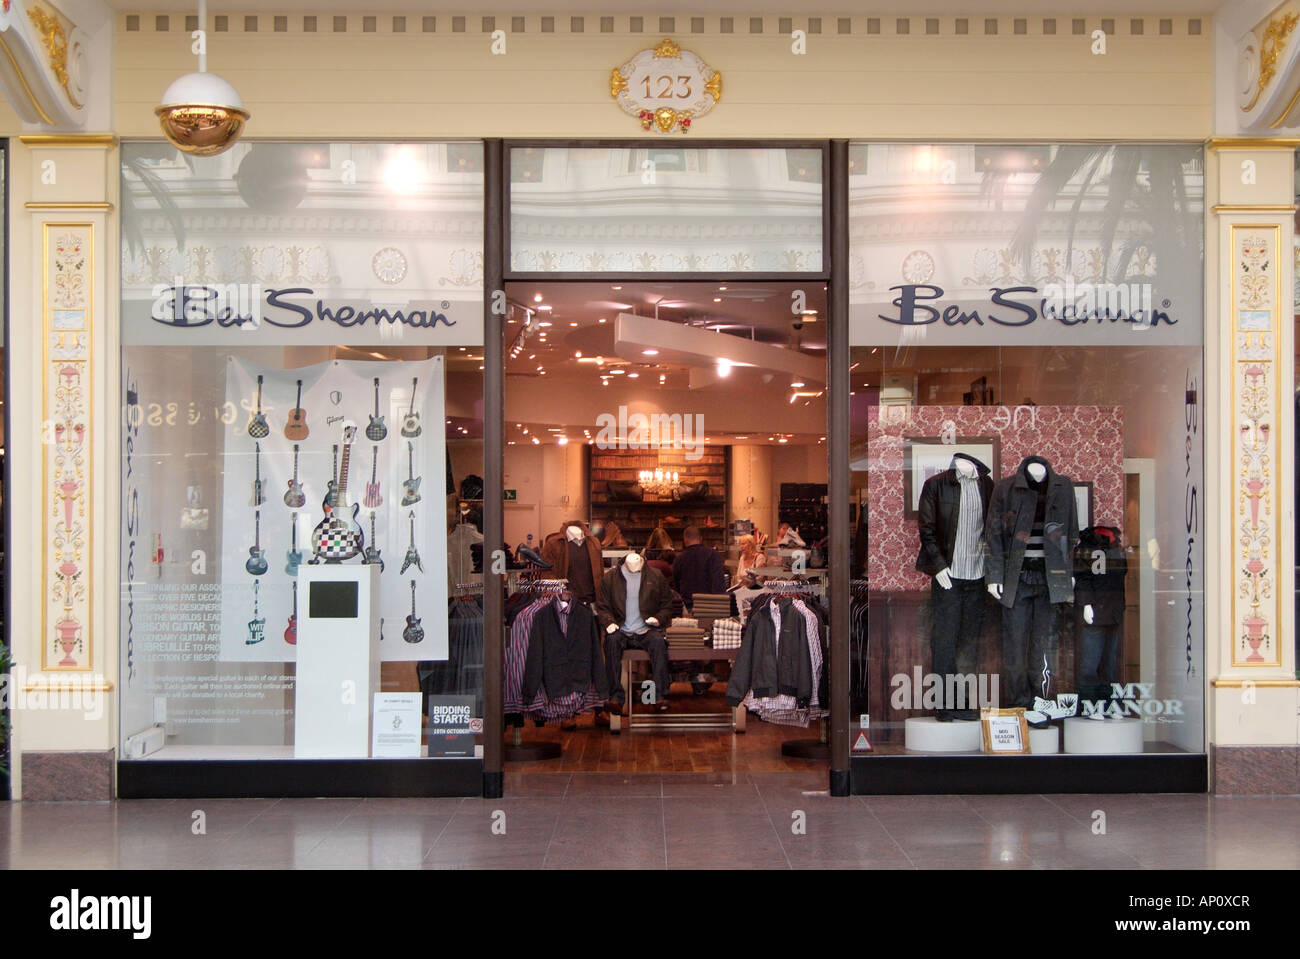 Ben Sherman Shirt High Resolution Stock Photography and Images - Alamy